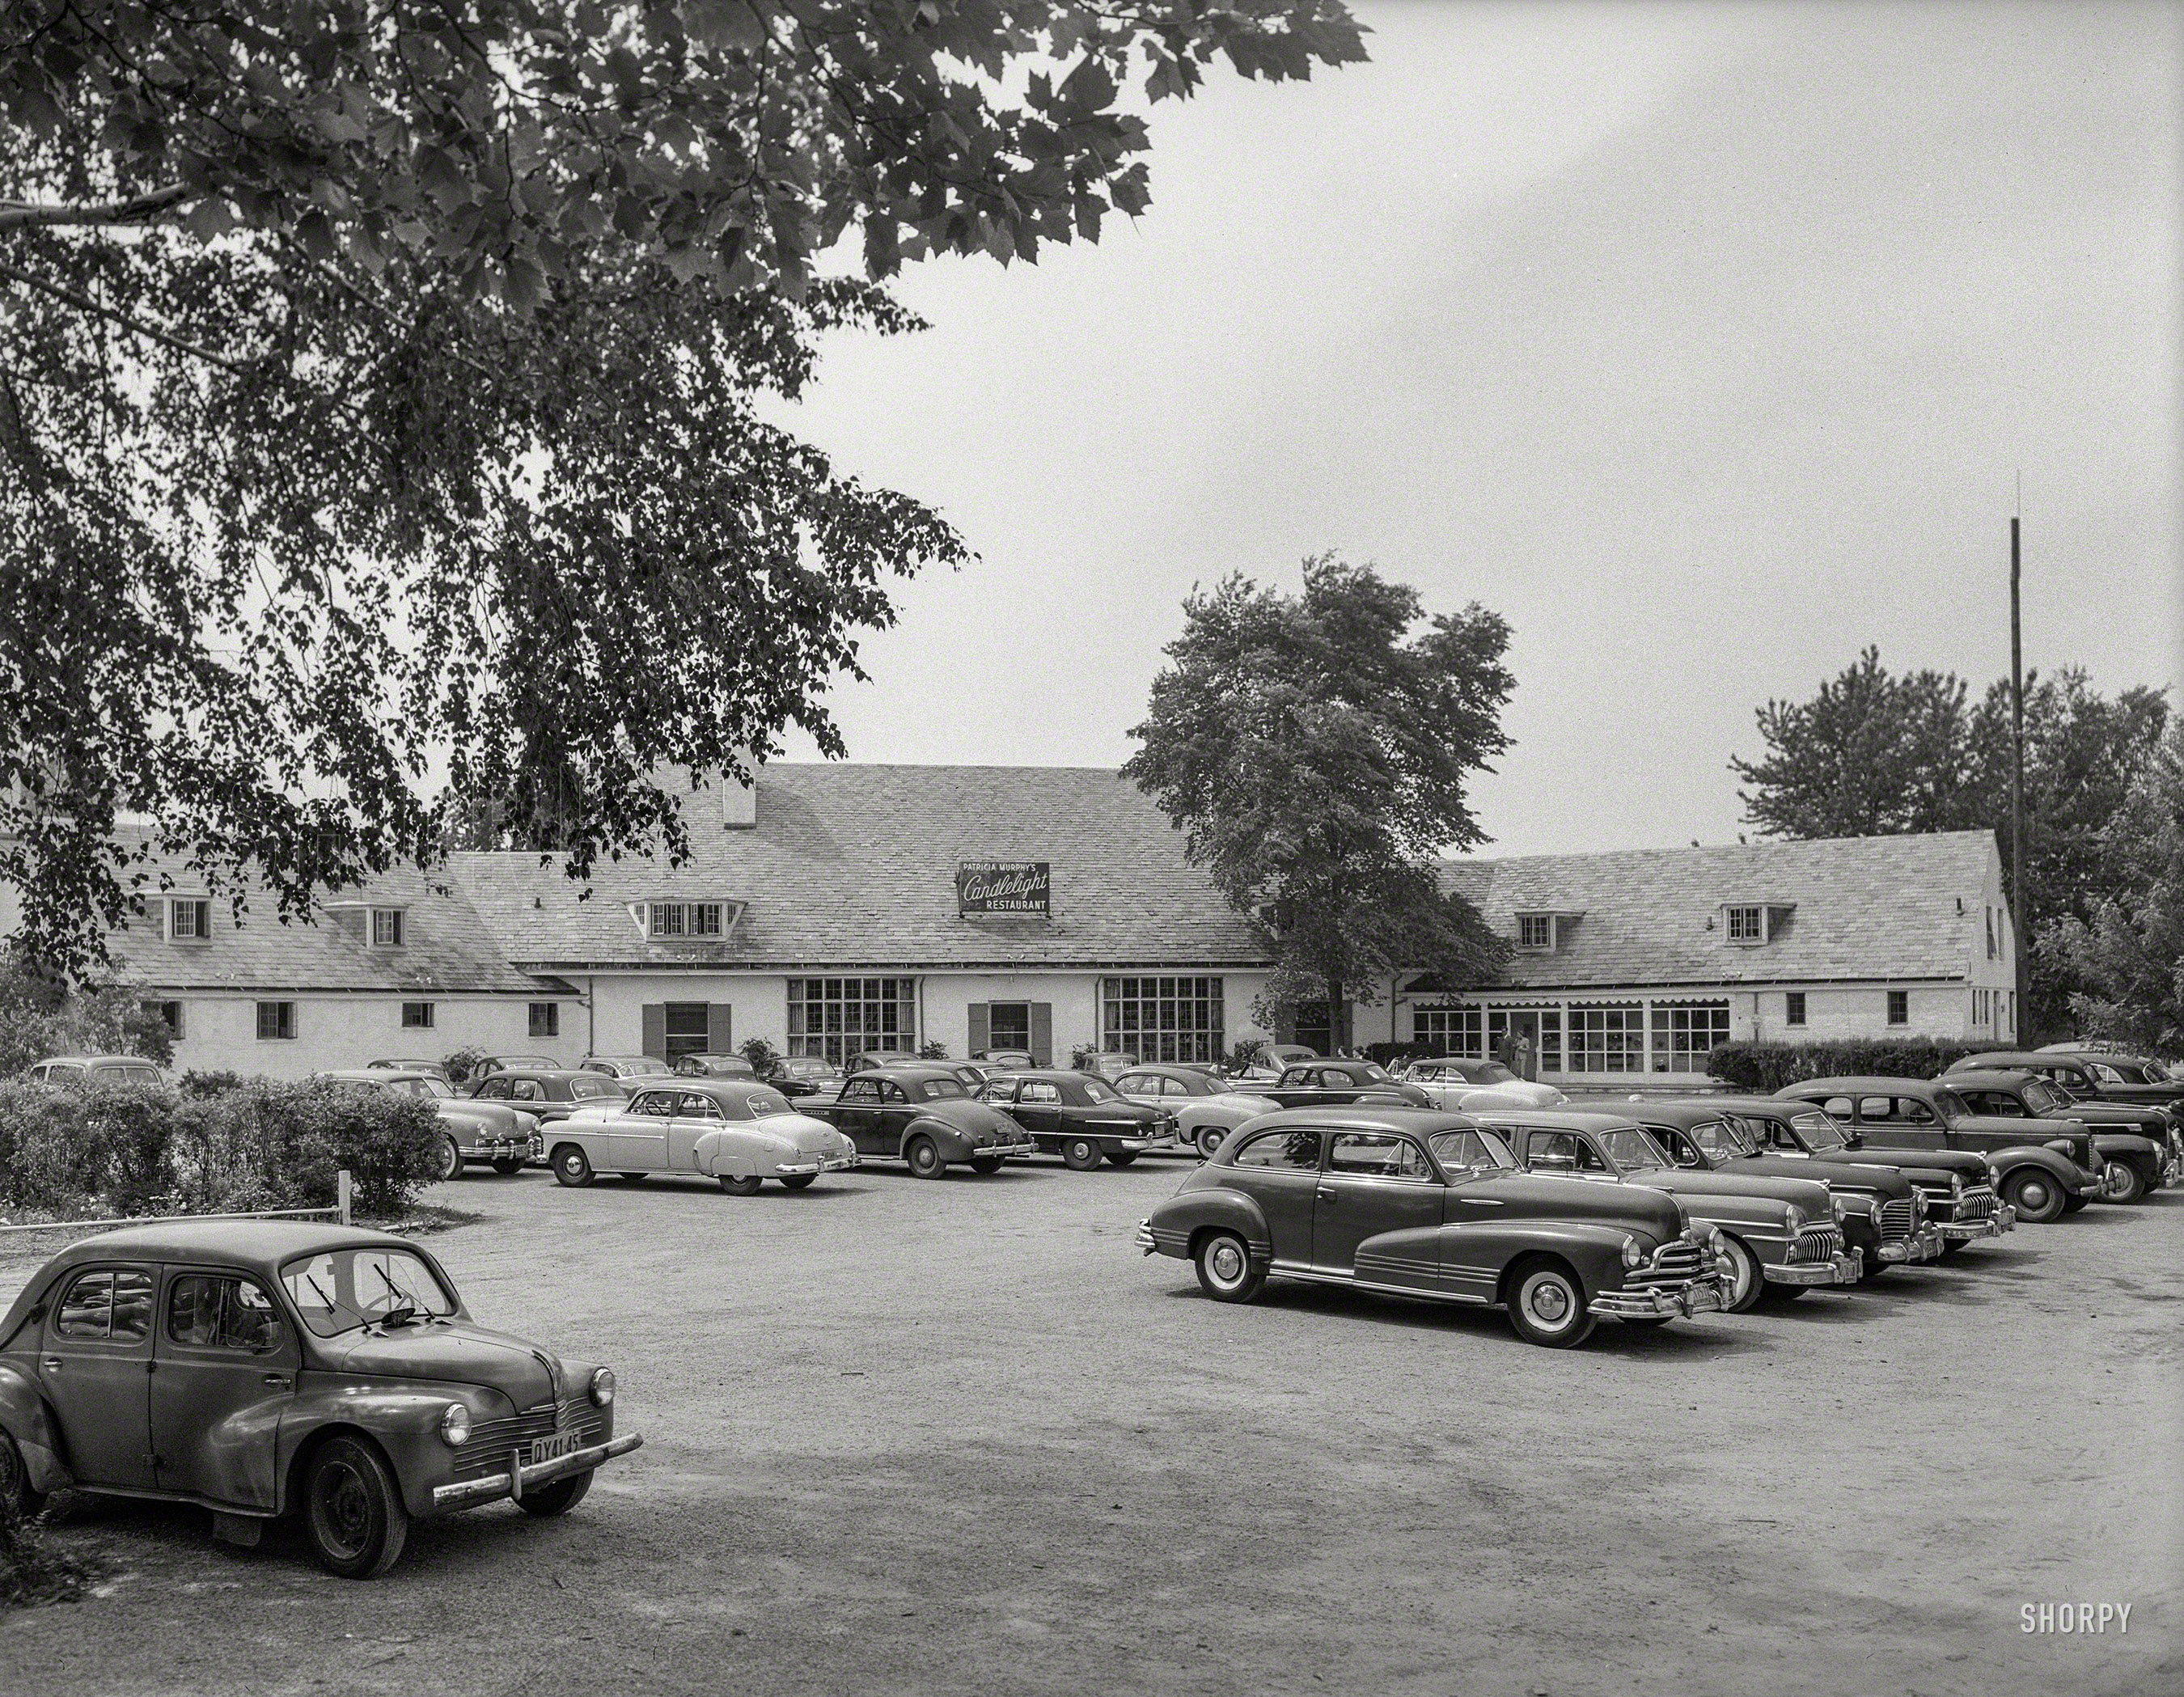 May 26, 1951. "Patricia Murphy's Candlelight Restaurant, Manhasset, Long Island, New York. Exterior, with autos." Nonconformists will please park to the left. Large-format acetate negative by Gottscho-Schleisner. View full size.